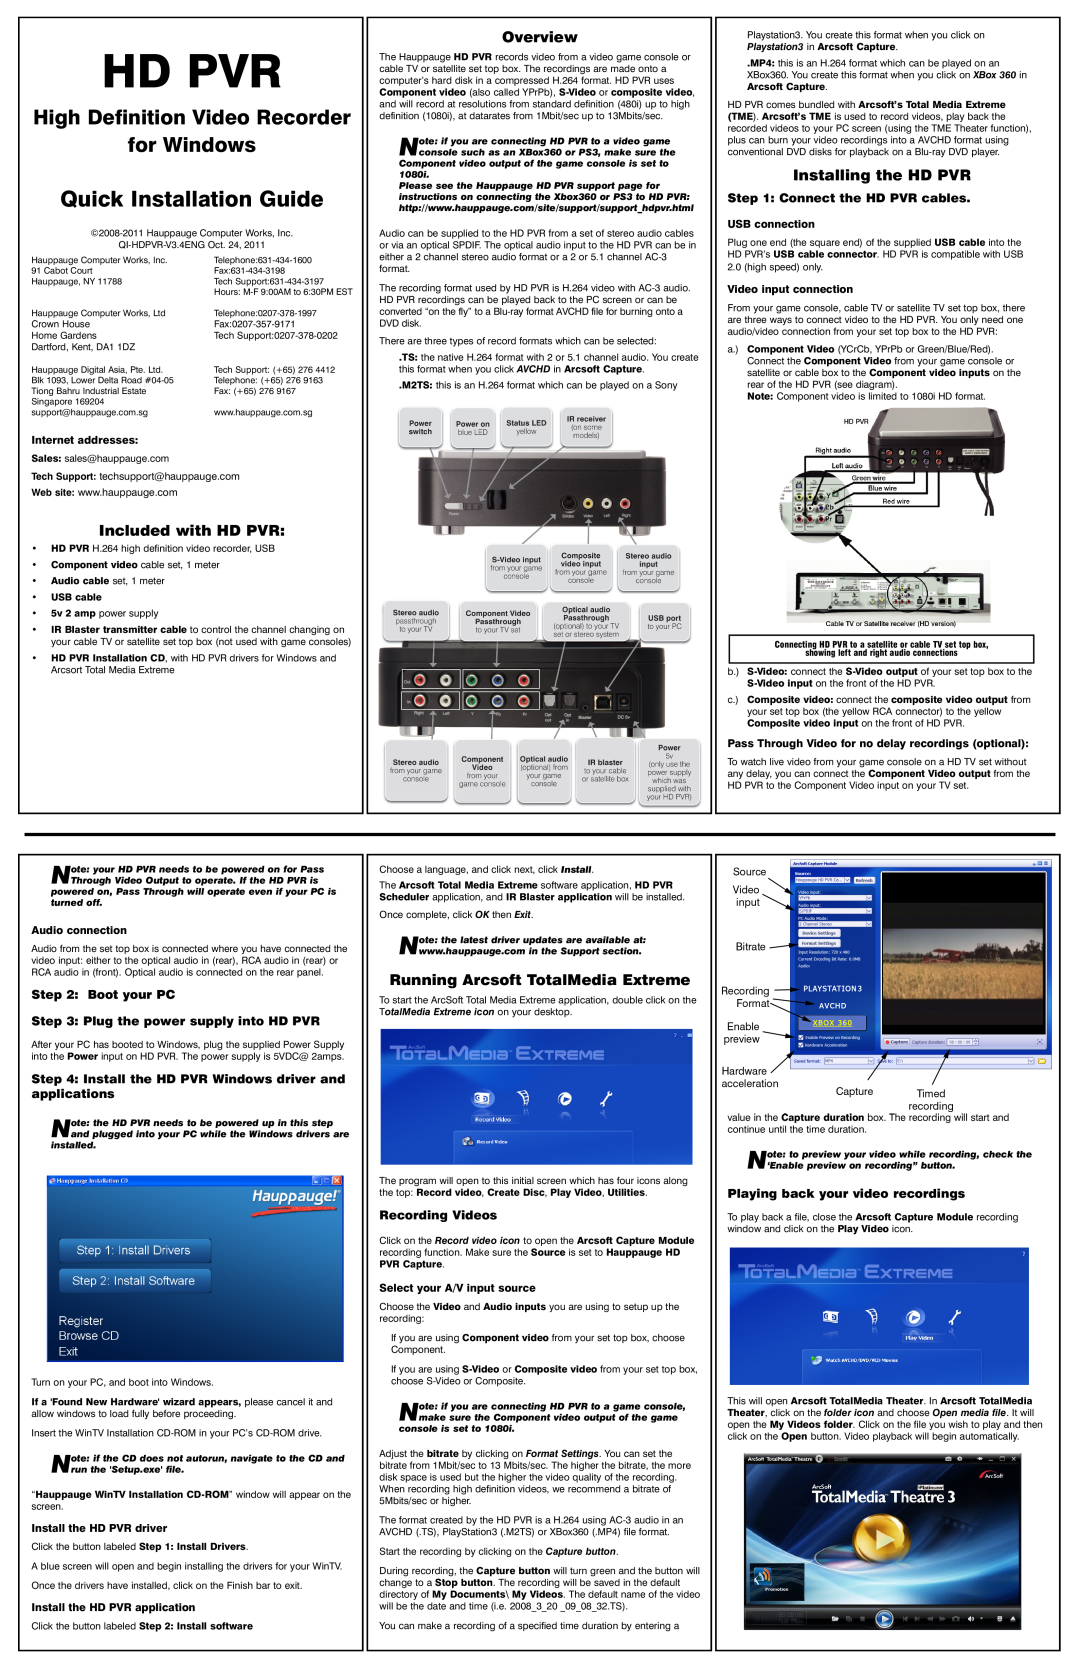 Hauppauge 1212 manual Included with HD PVR, Overview, Installing the HD PVR, Running Arcsoft TotalMedia Extreme, Hd Pvr 